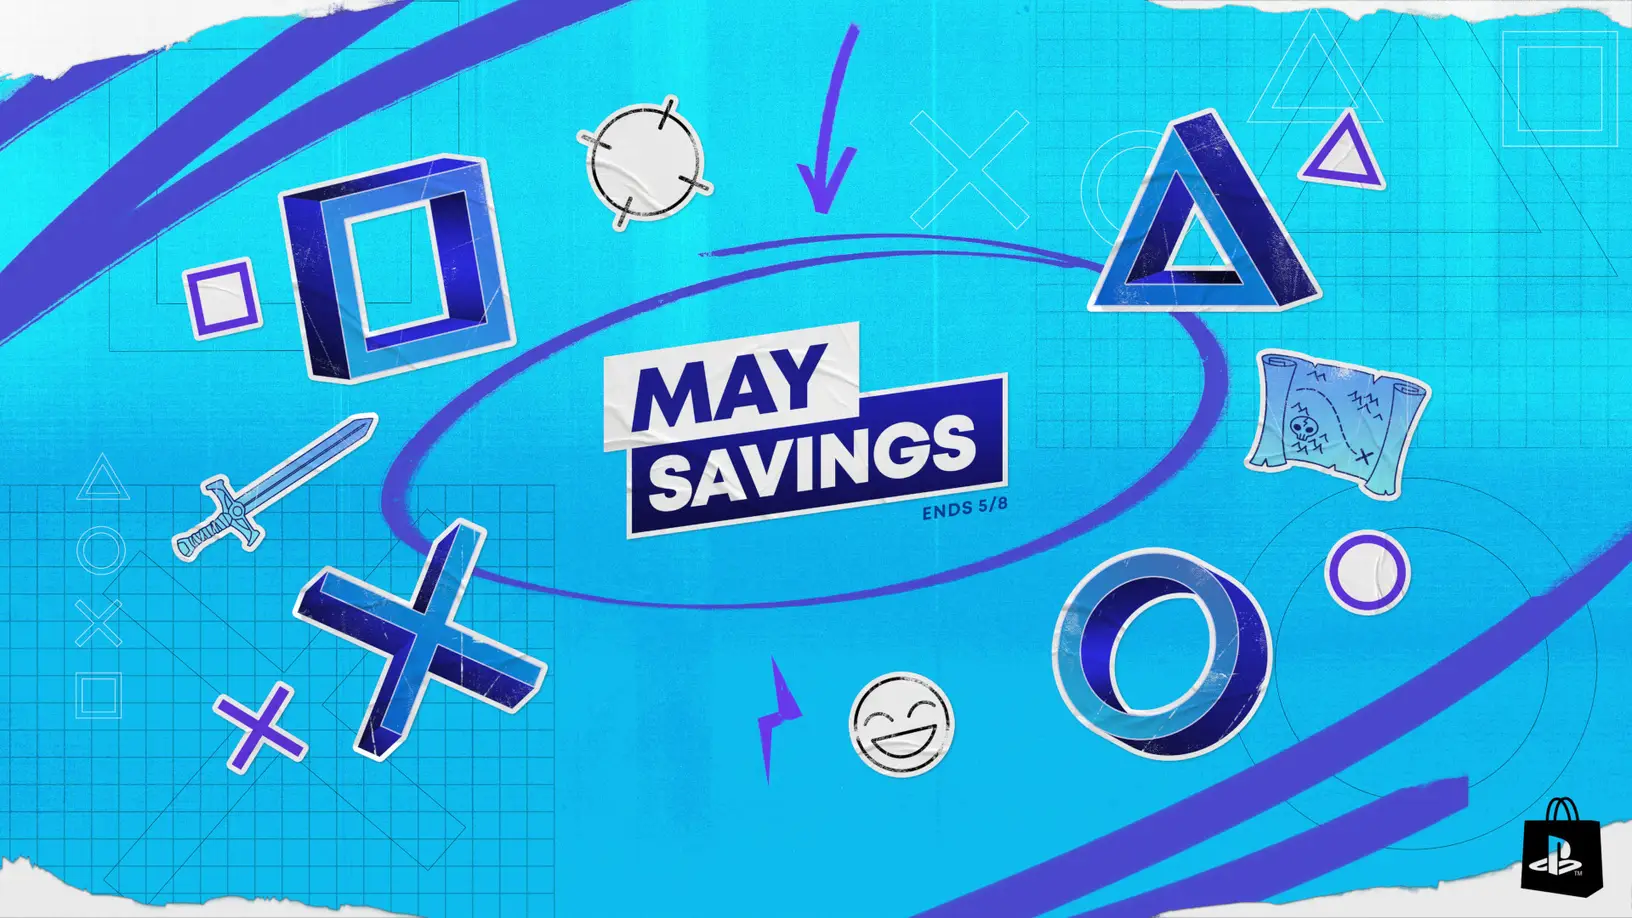 Sony Launches May Savings Event with Massive Discounts on Popular Games